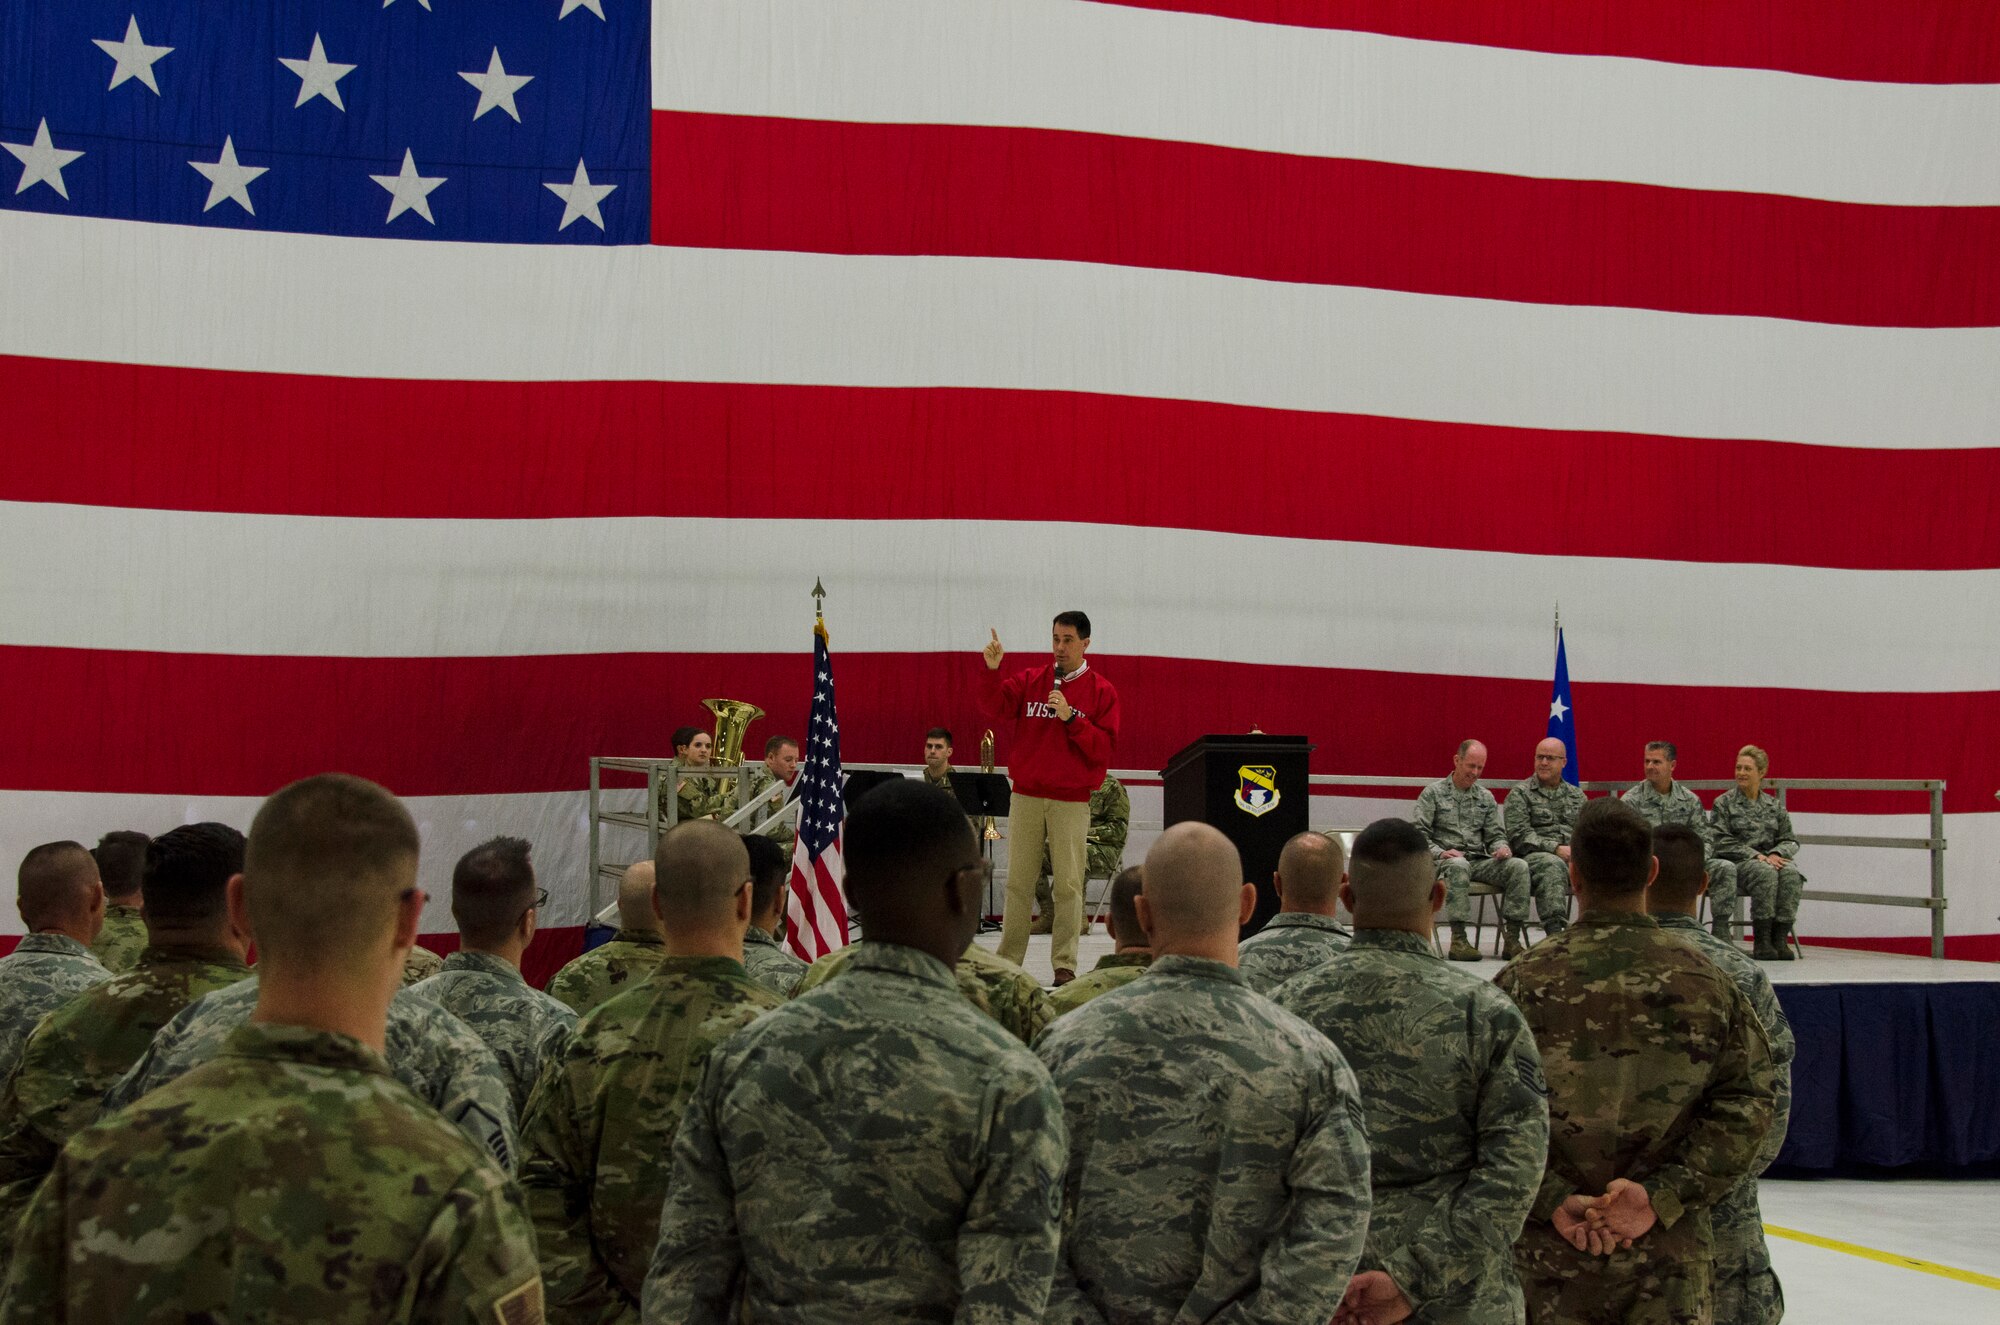 Governor Scott Walker, governor of Wisconsin, addresses deploying Airmen with the 128th Air Refueling Wing, Wisconsin Air National Guard, during a sendoff ceremony at General Mitchell Airfield in Milwaukee, Wisconsin, Dec. 2, 2017.